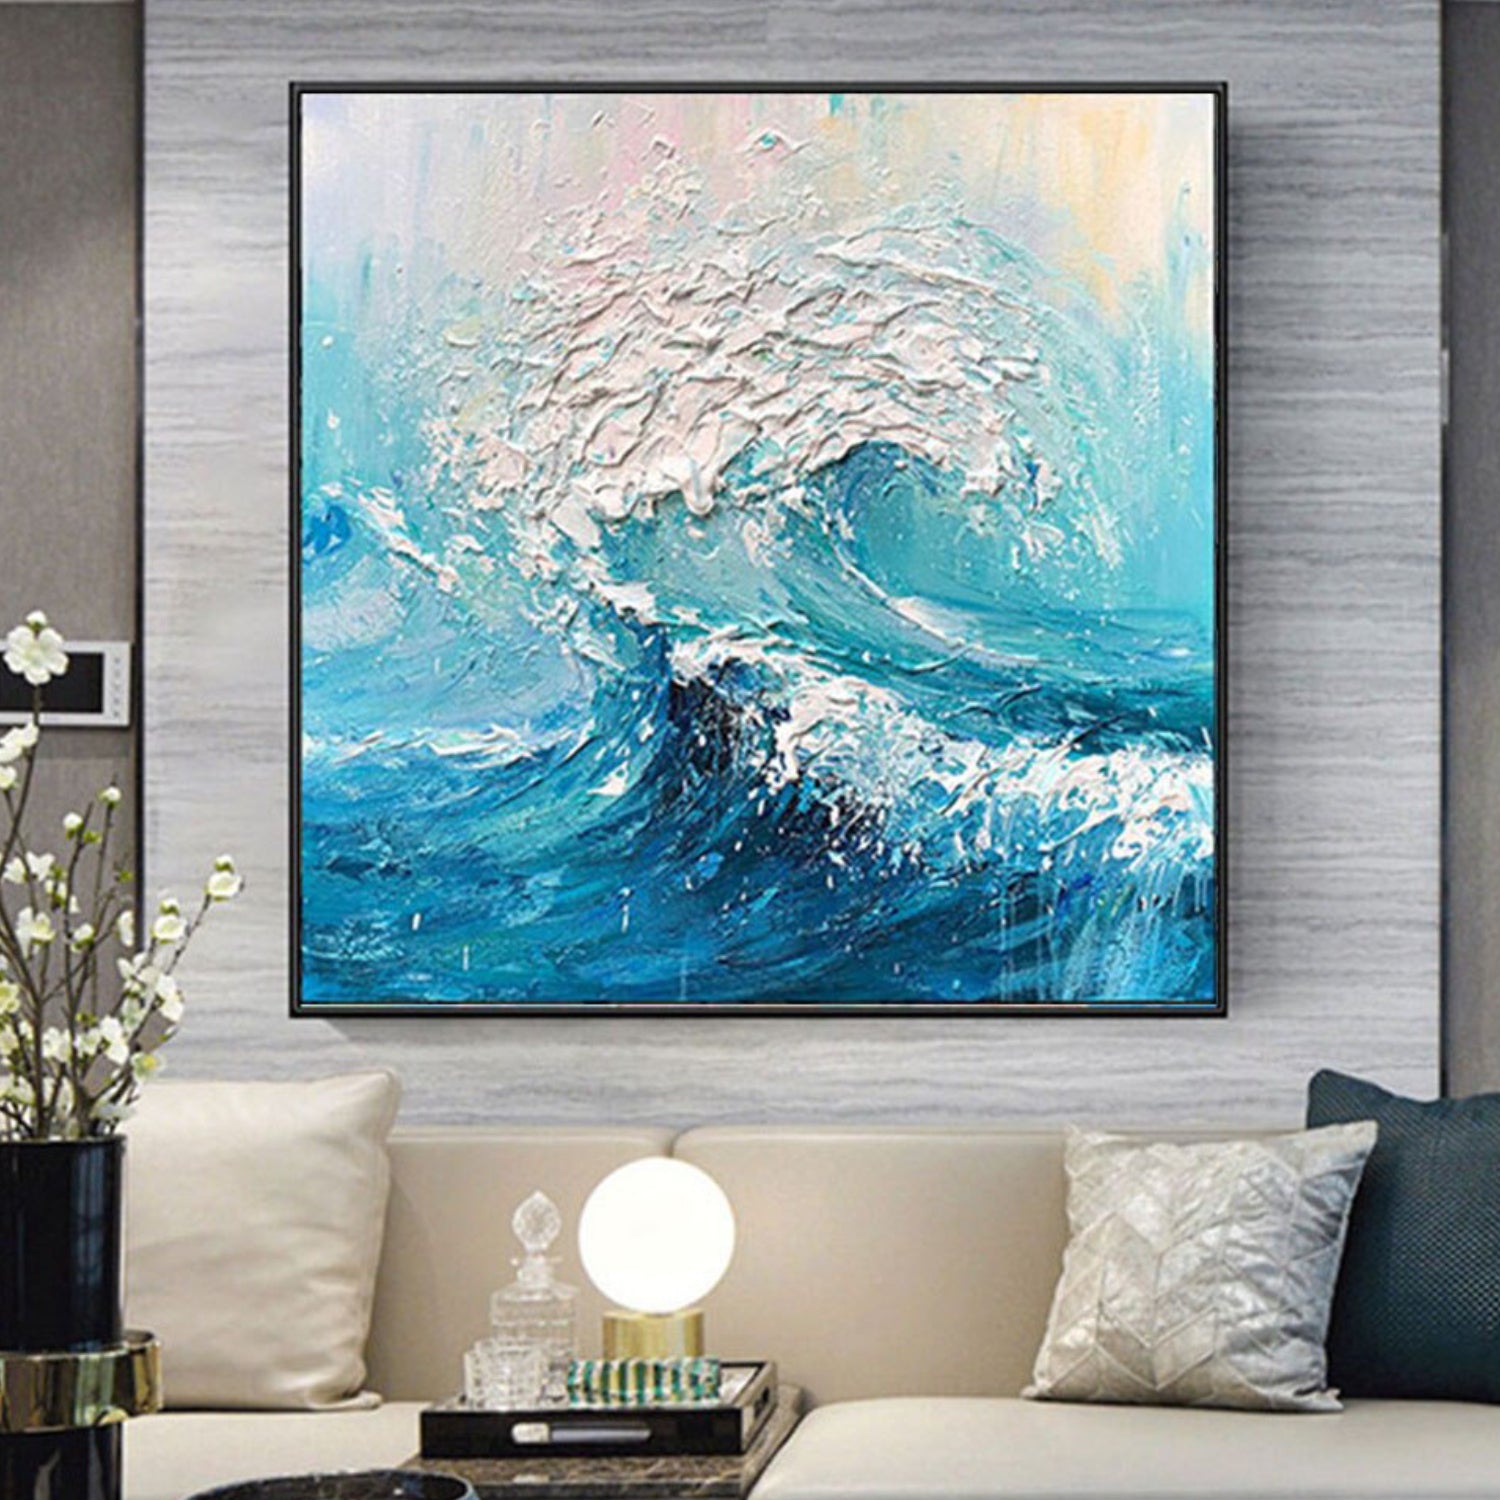 100% Hand-painted Abstract Majestic Wave Wall Art